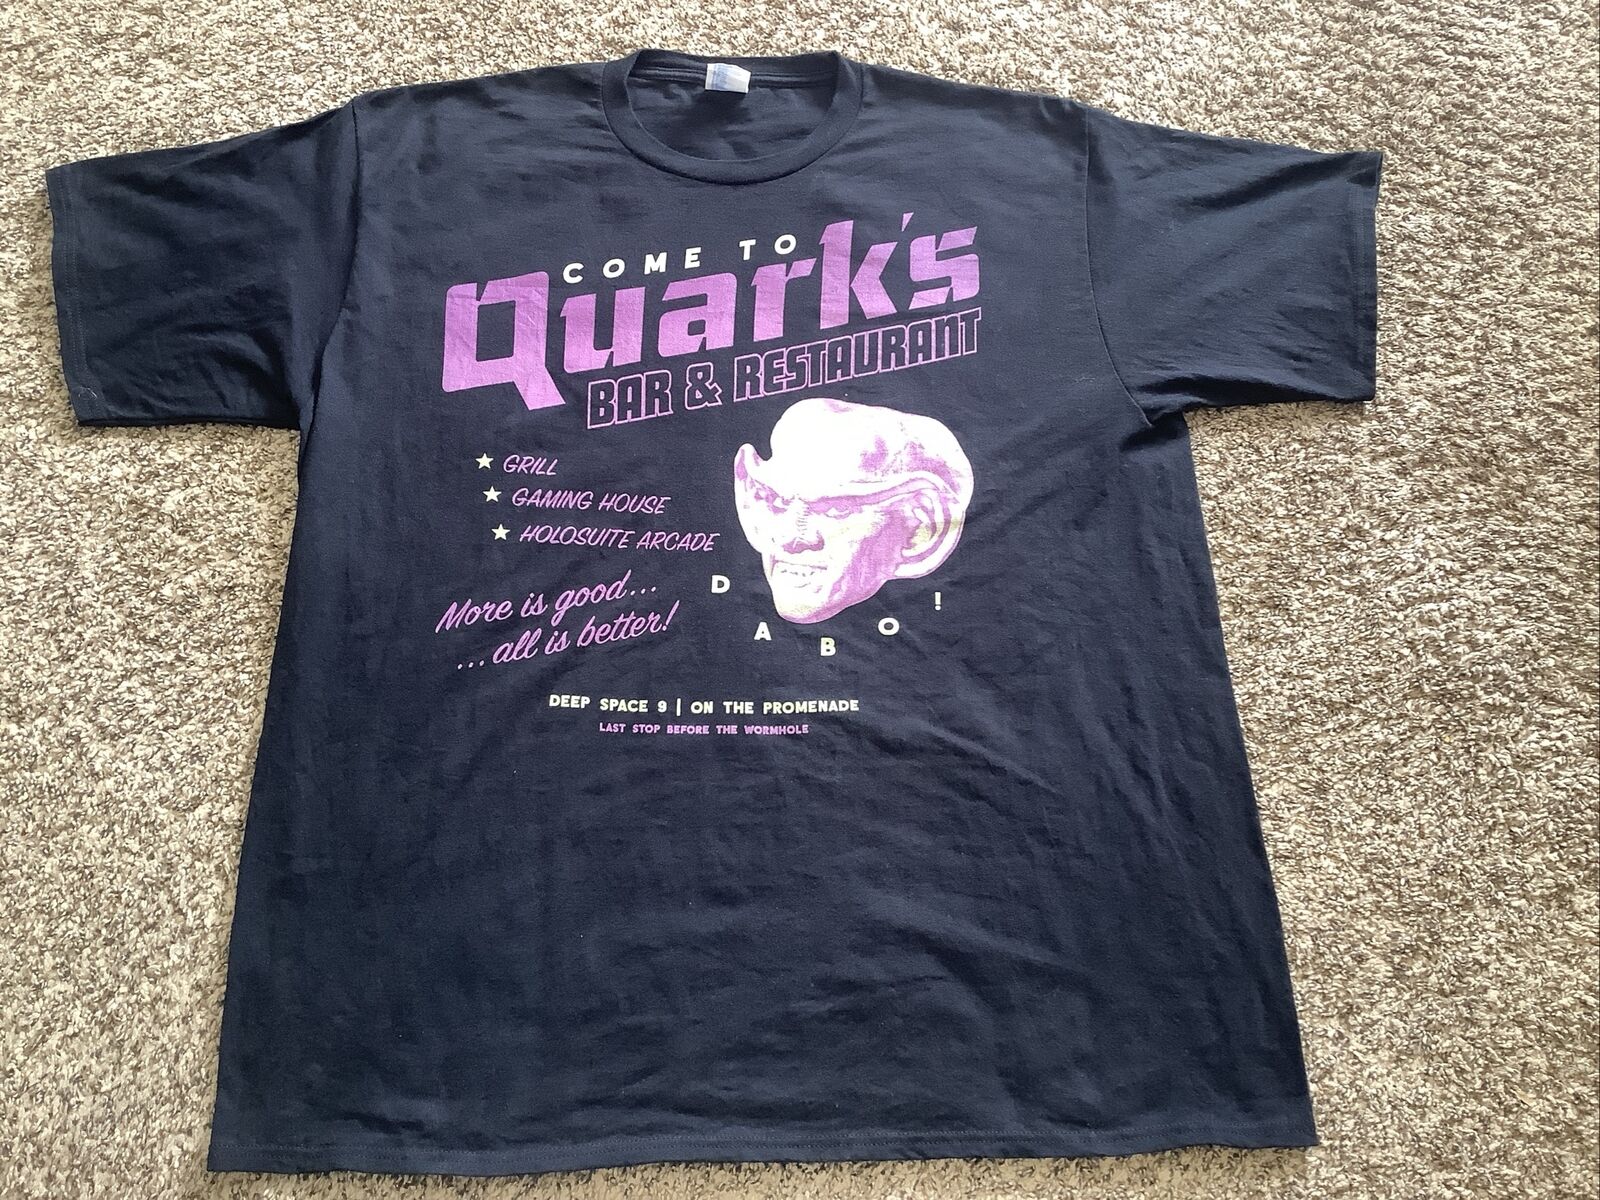 Come To “QUARK’S BAR & RESTAURANT” Tee Shirt, Size 2XL, More Is Good..